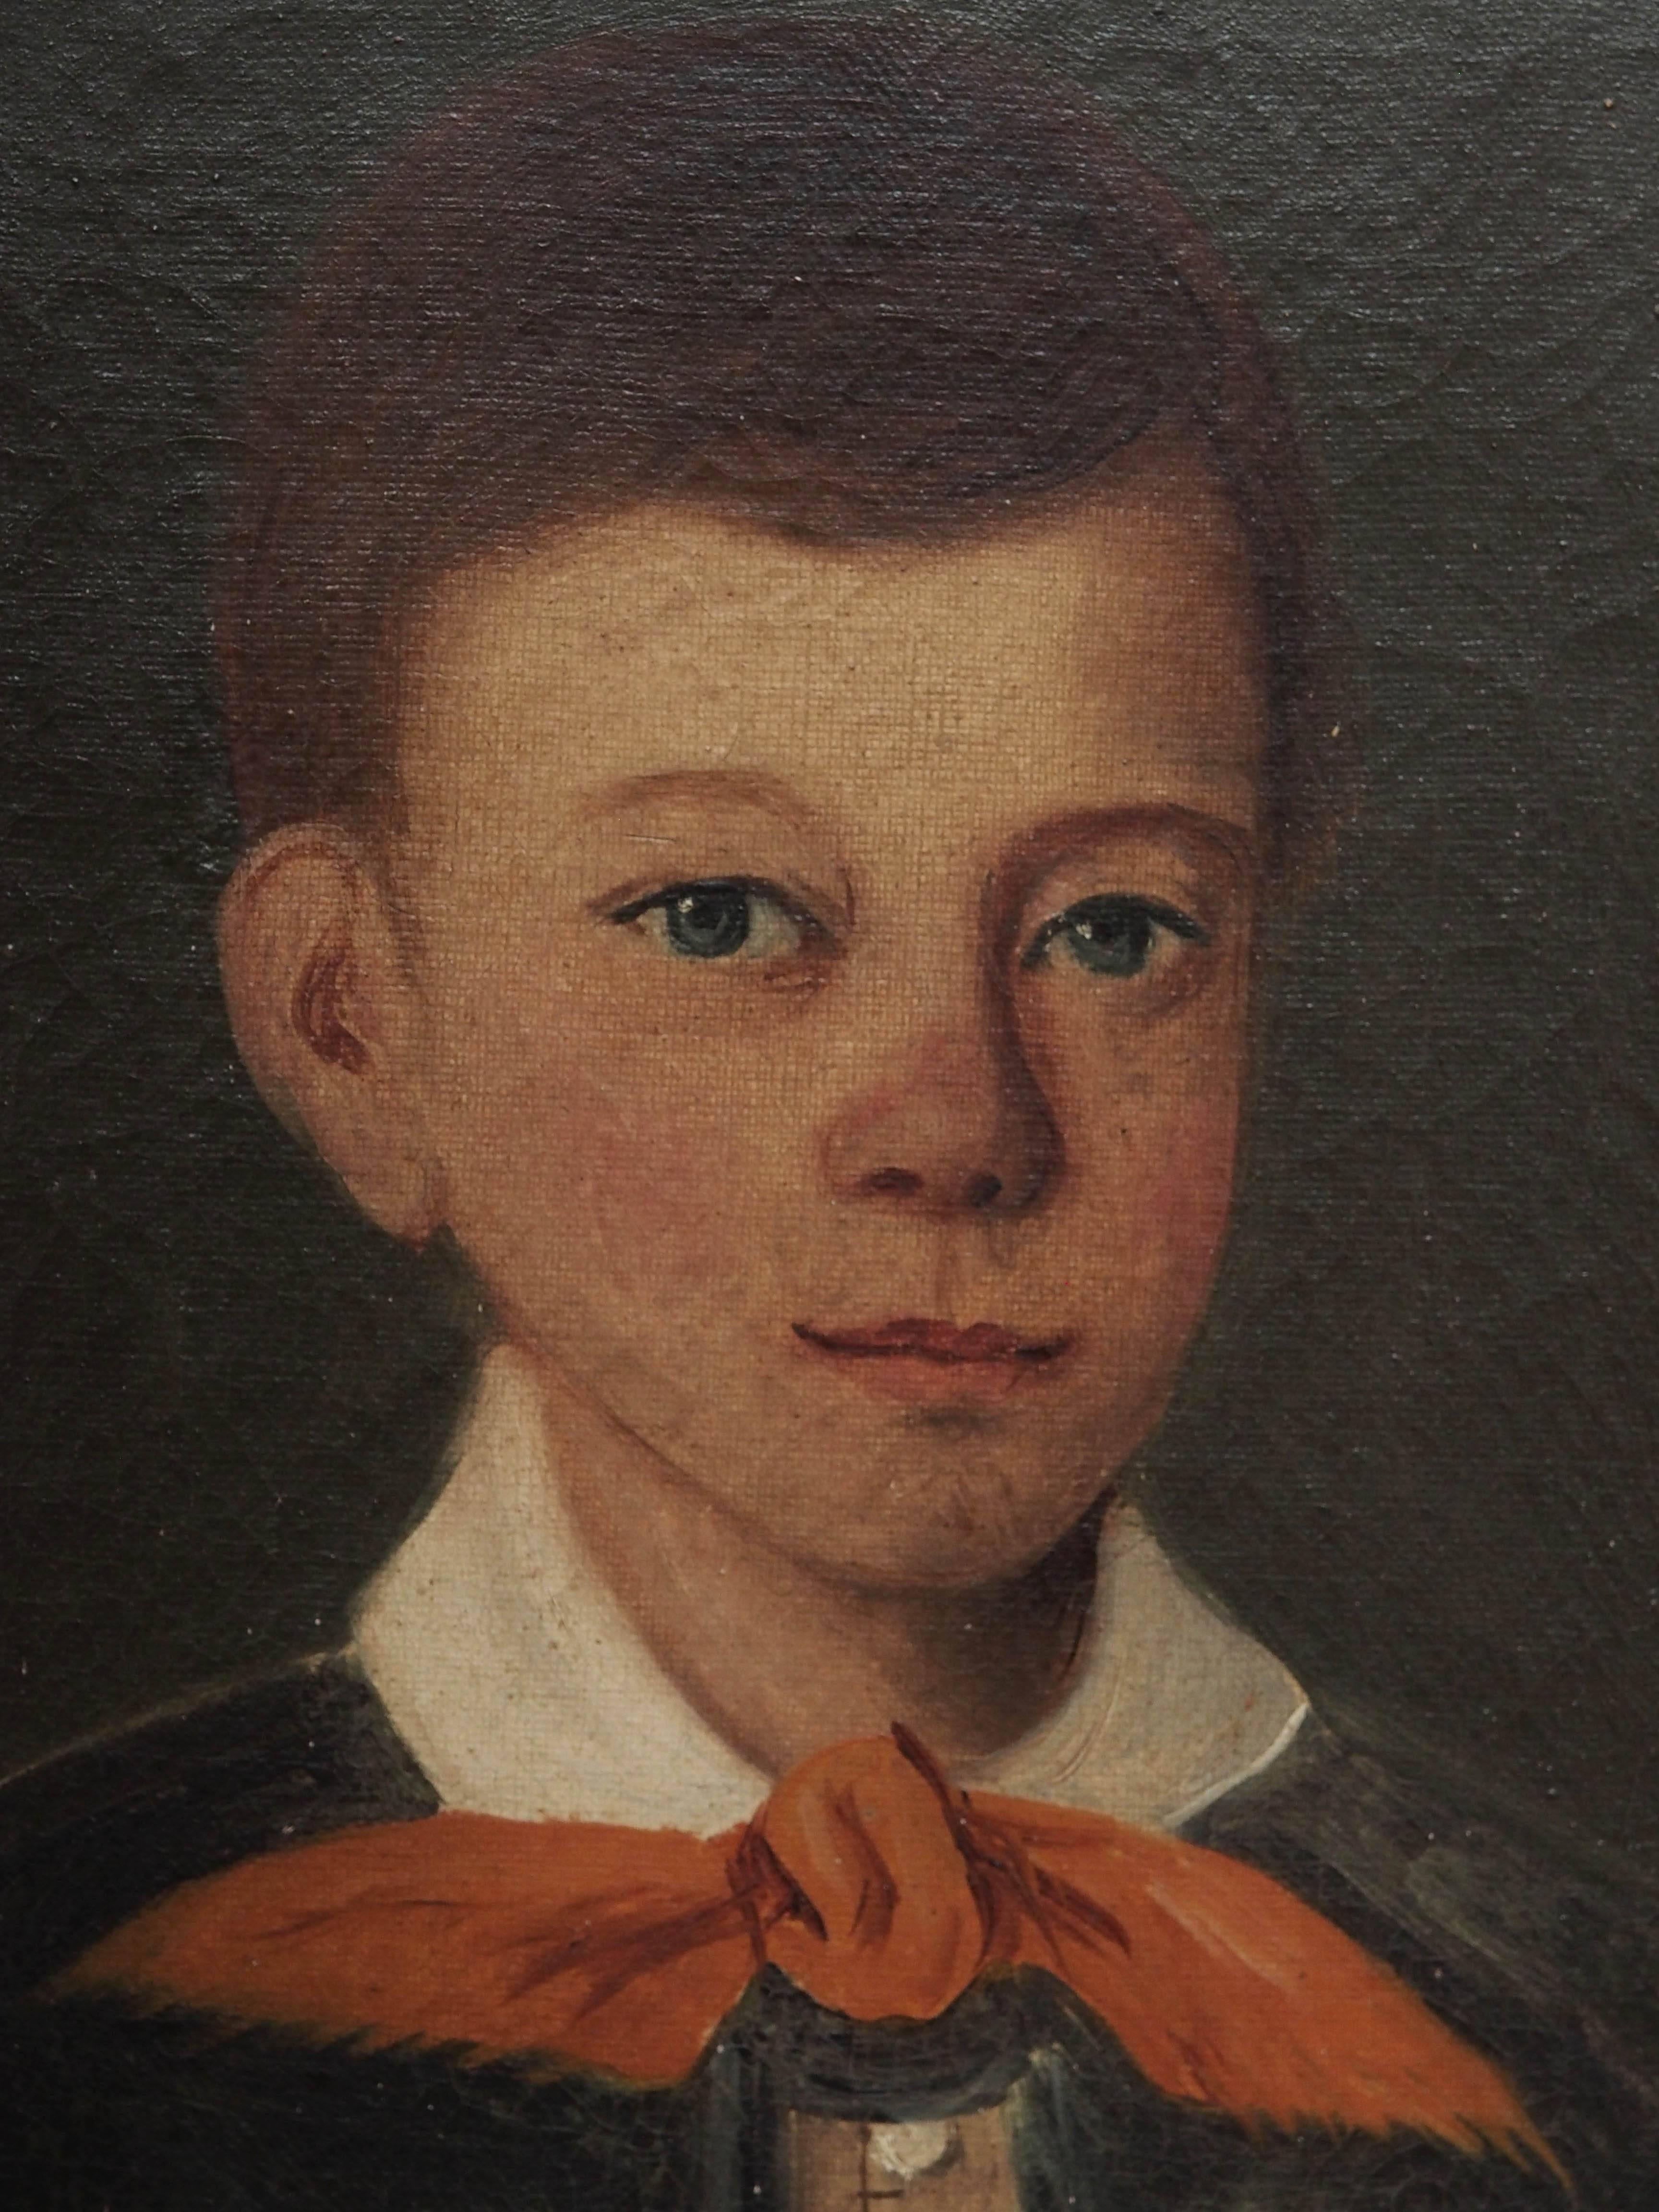 An oil on canvas portrait of a boy painted in France during the 1830s.
Measures: 18.5 x 15.